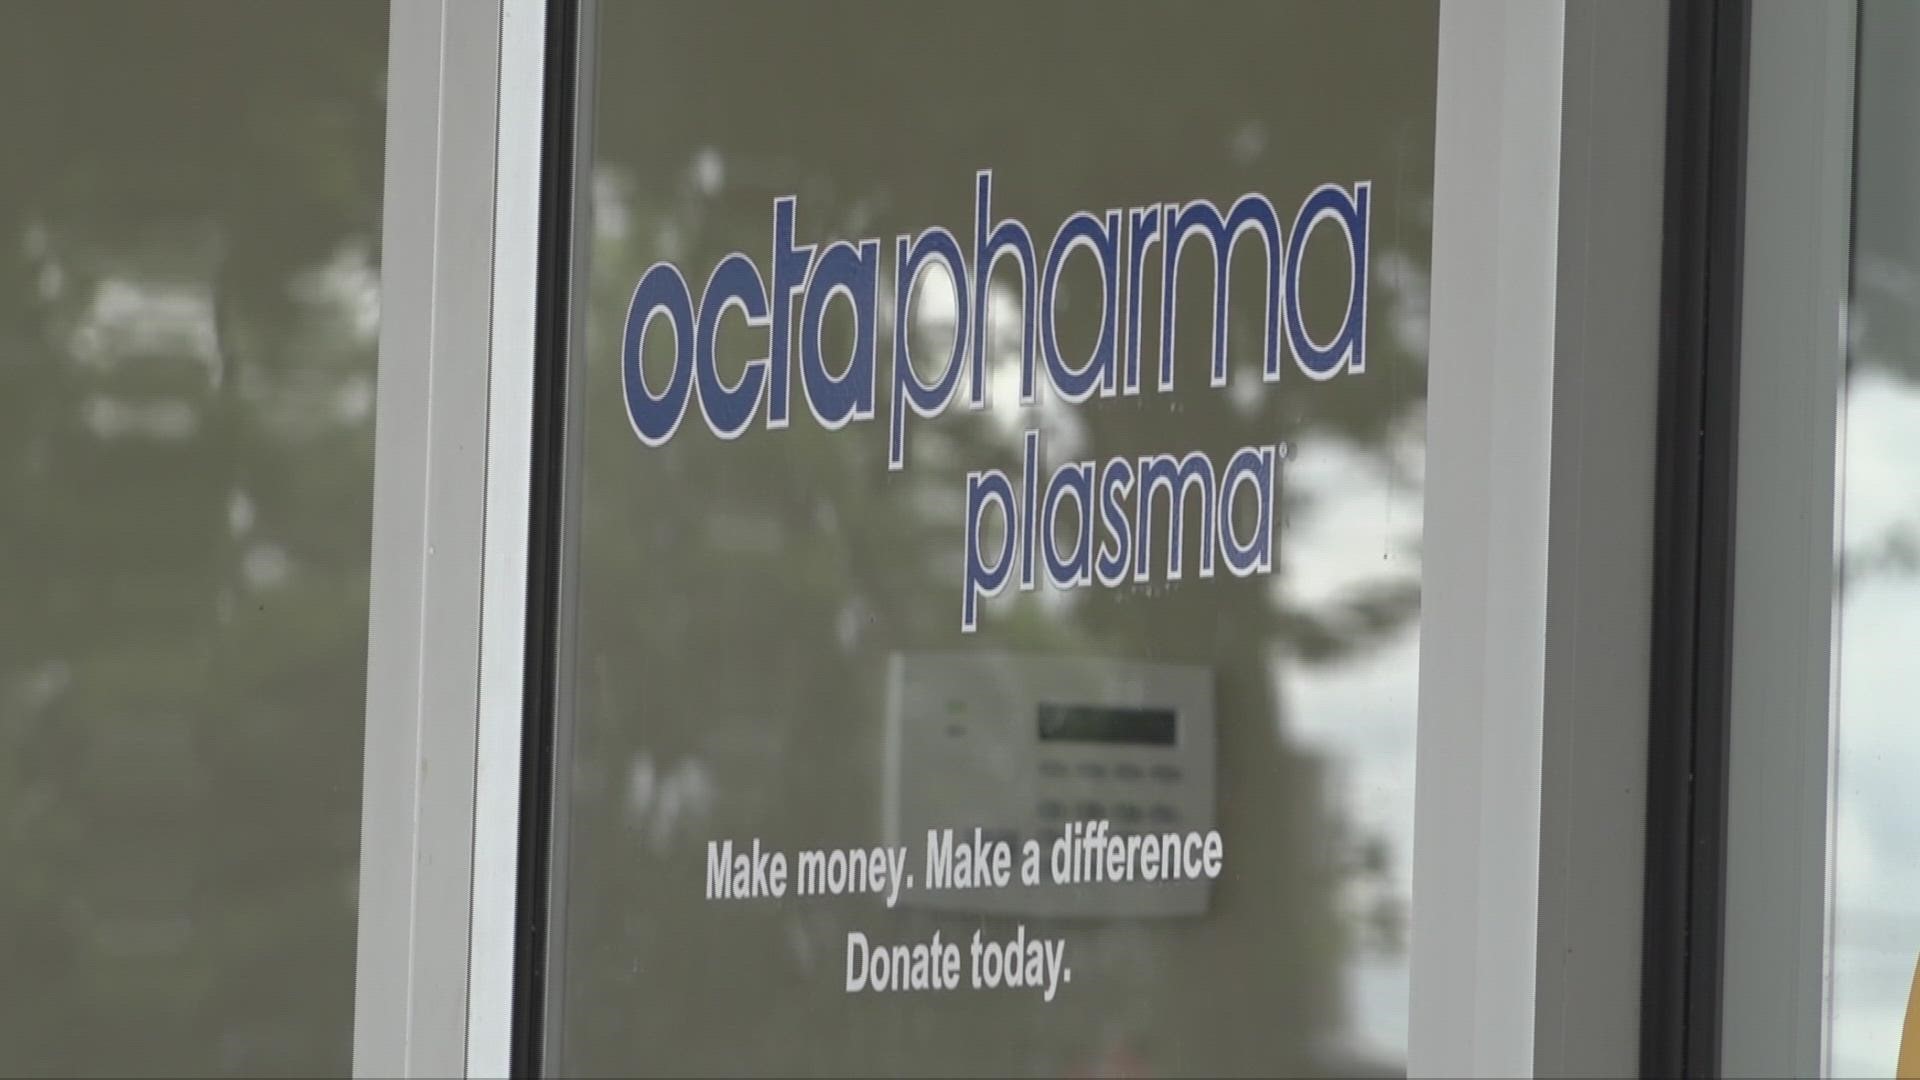 Donating plasma is a good way to make extra money. Here's how.